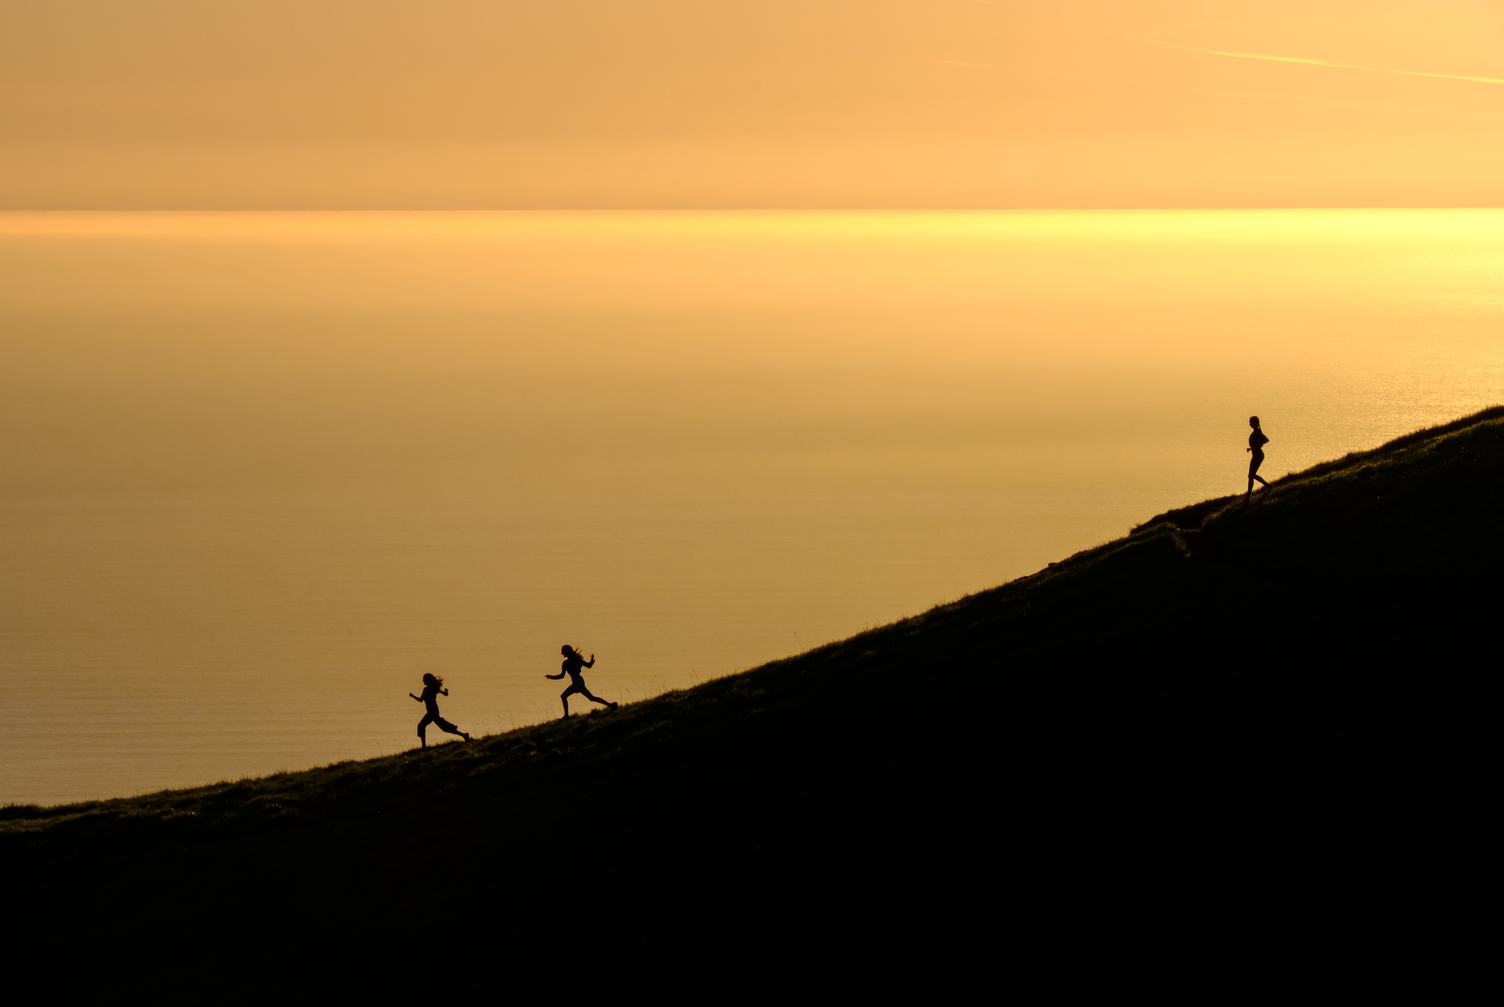 Women Silhouettes Running at Sunset with the Ocean in the Background